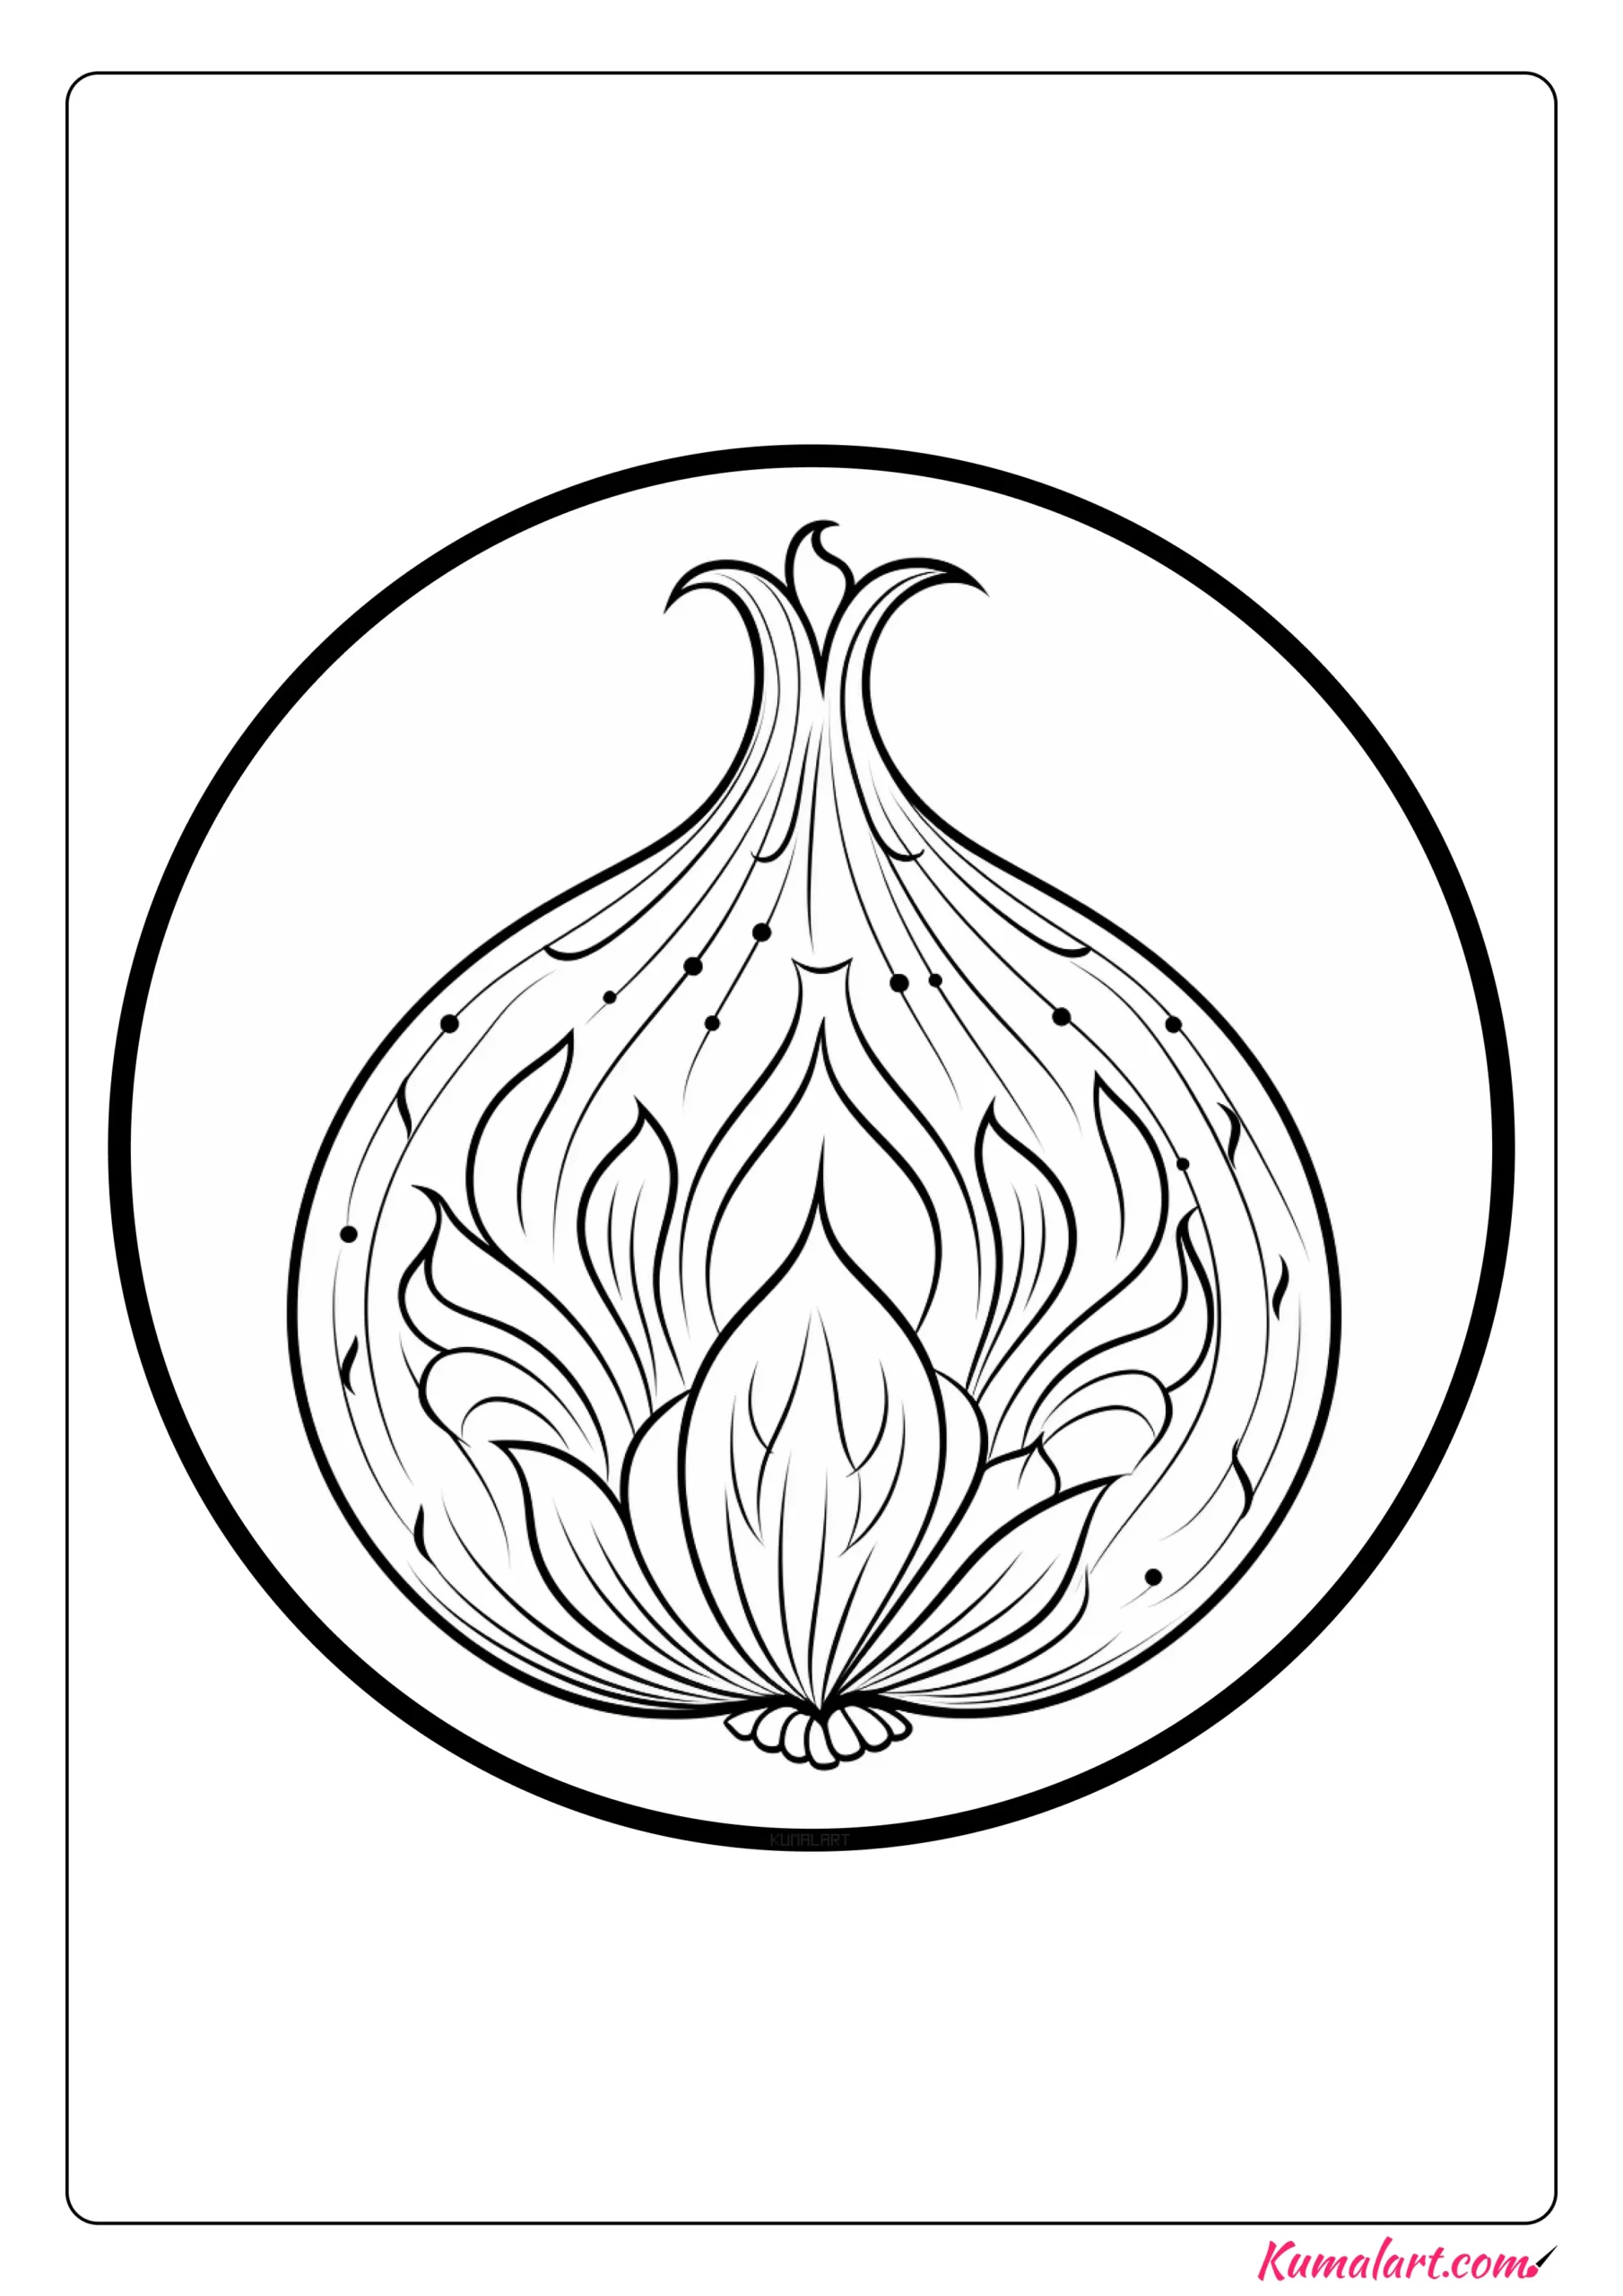 Yummy Onion Coloring Page